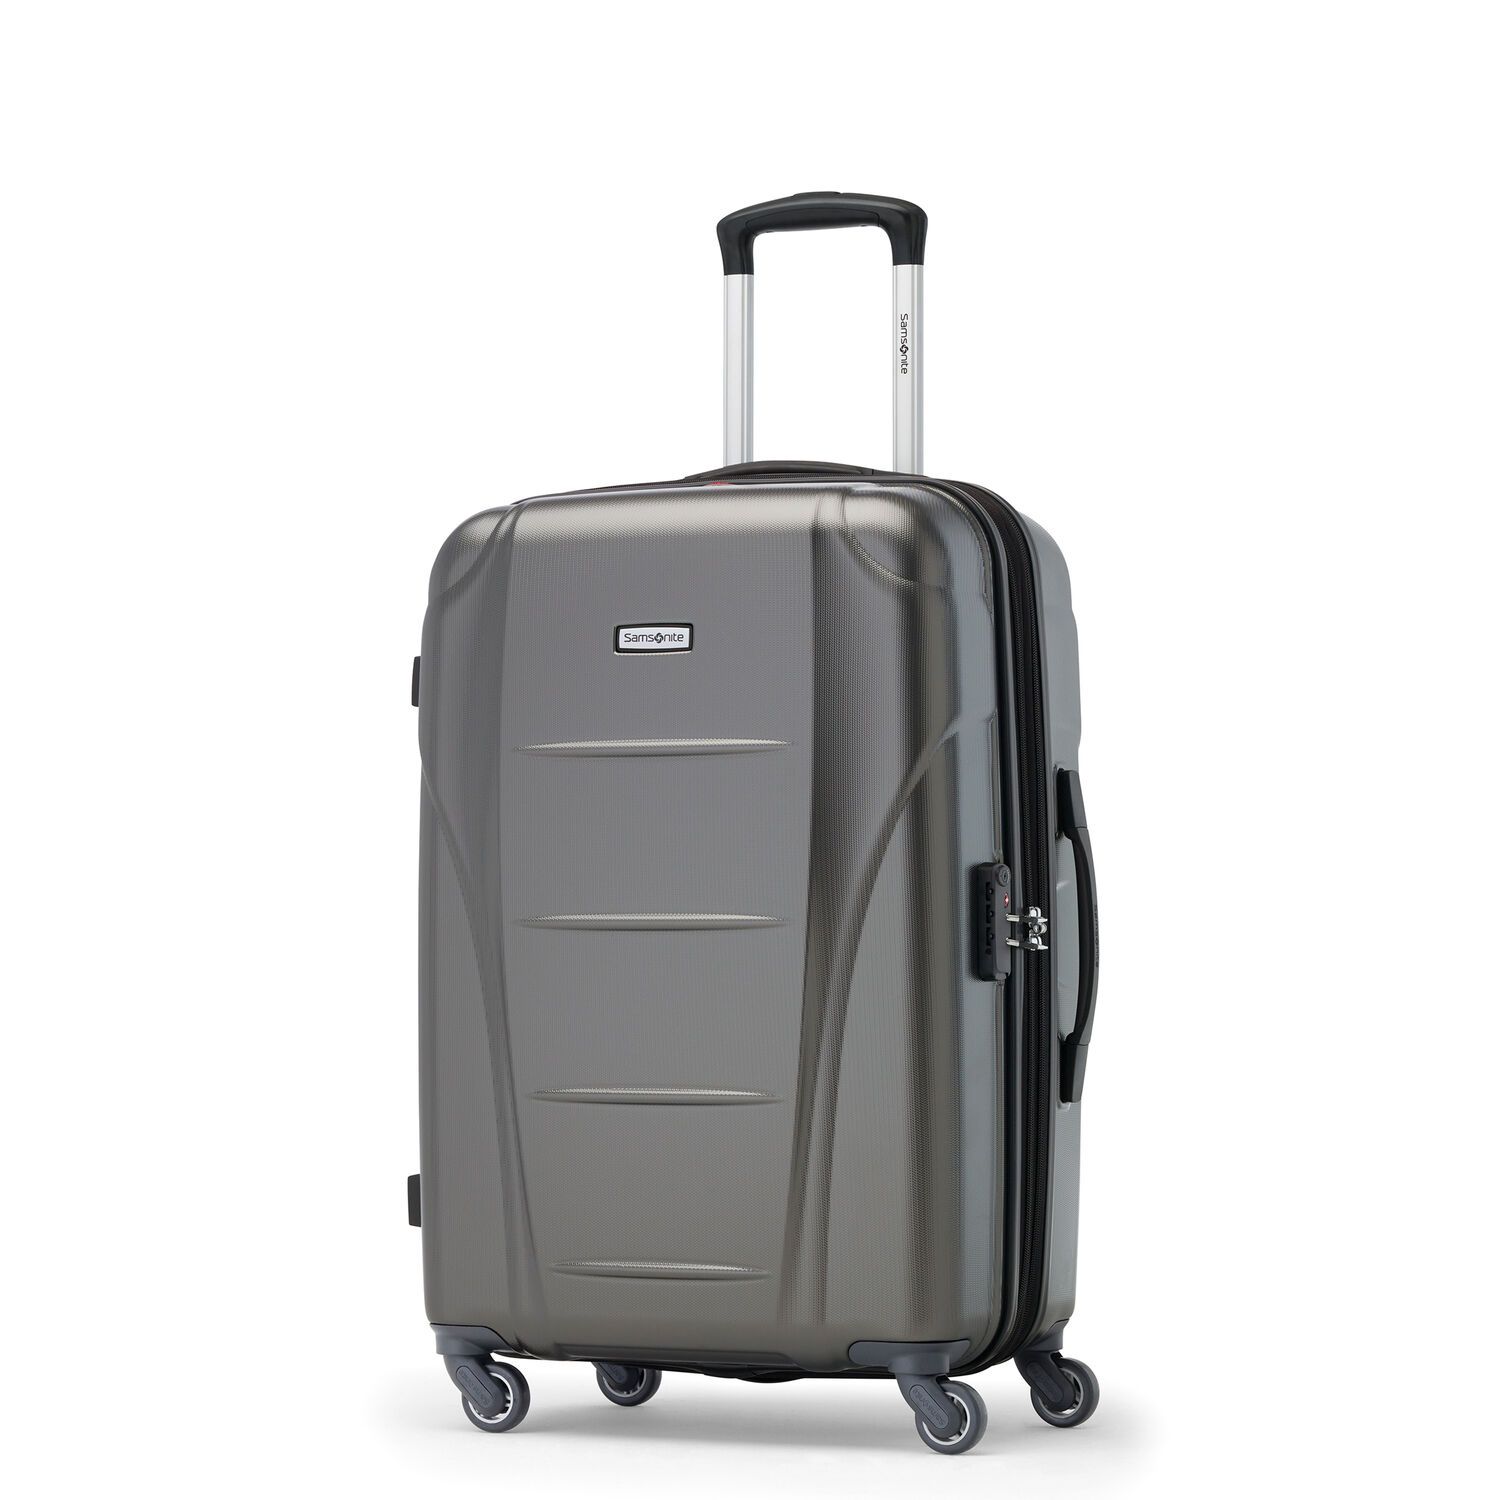 Samsonite Winfield NXT Spinner Medium Expandable Luggage - Charcoal